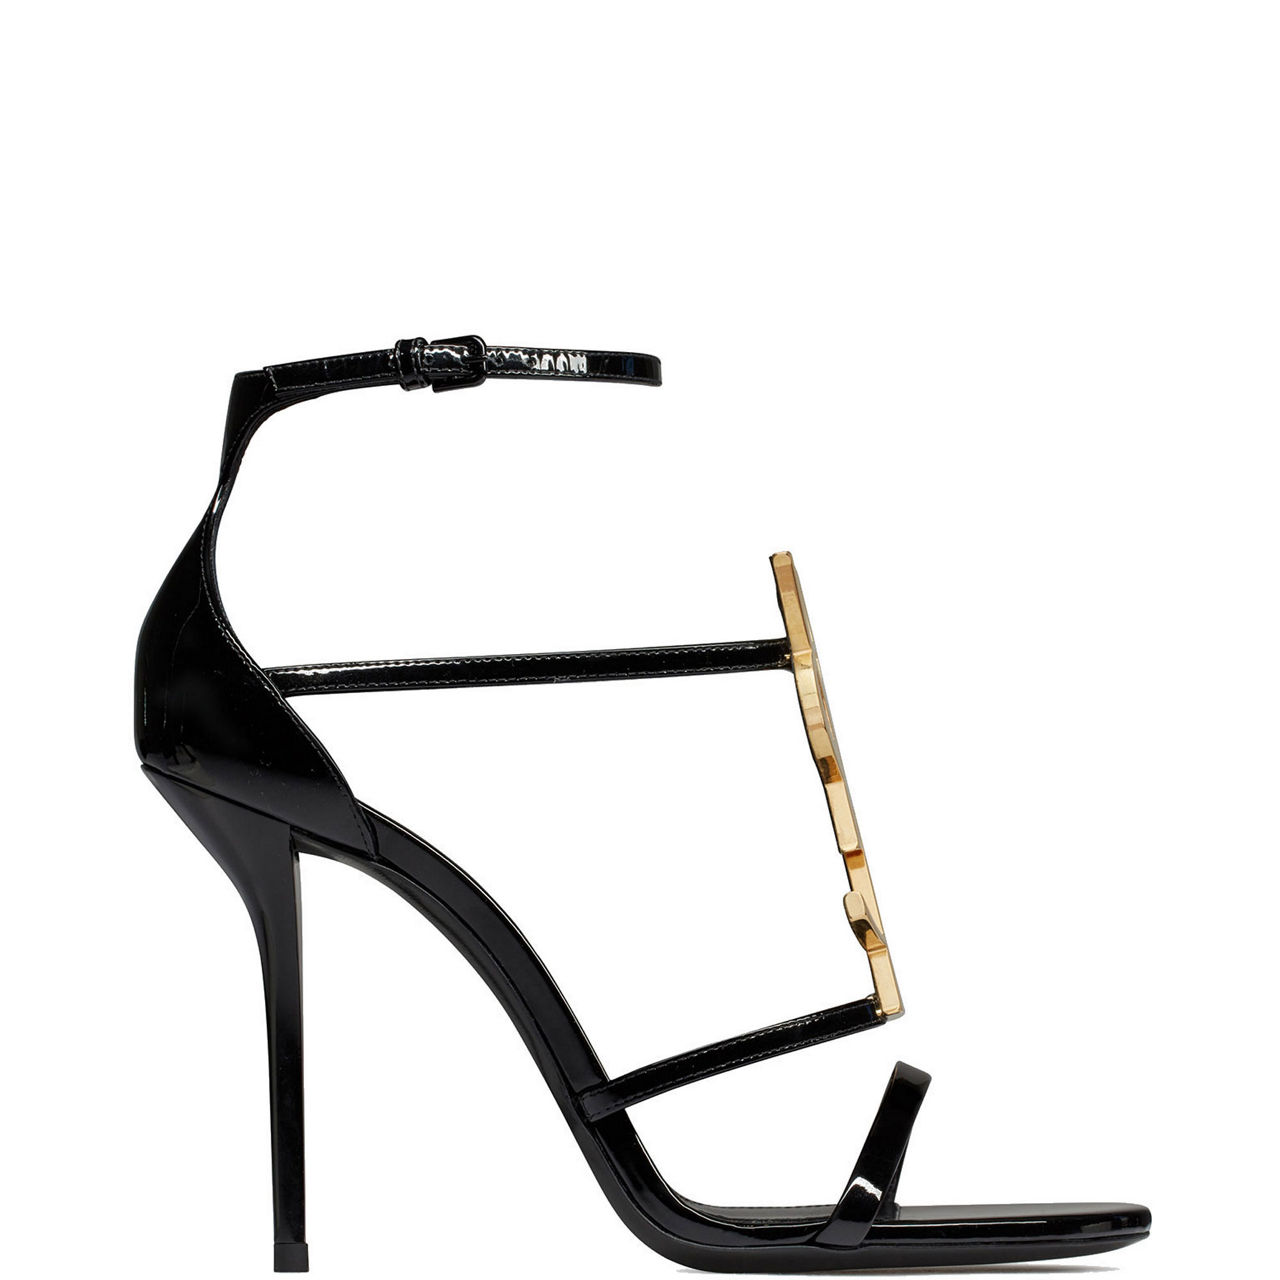 Dita sandals in patent leather